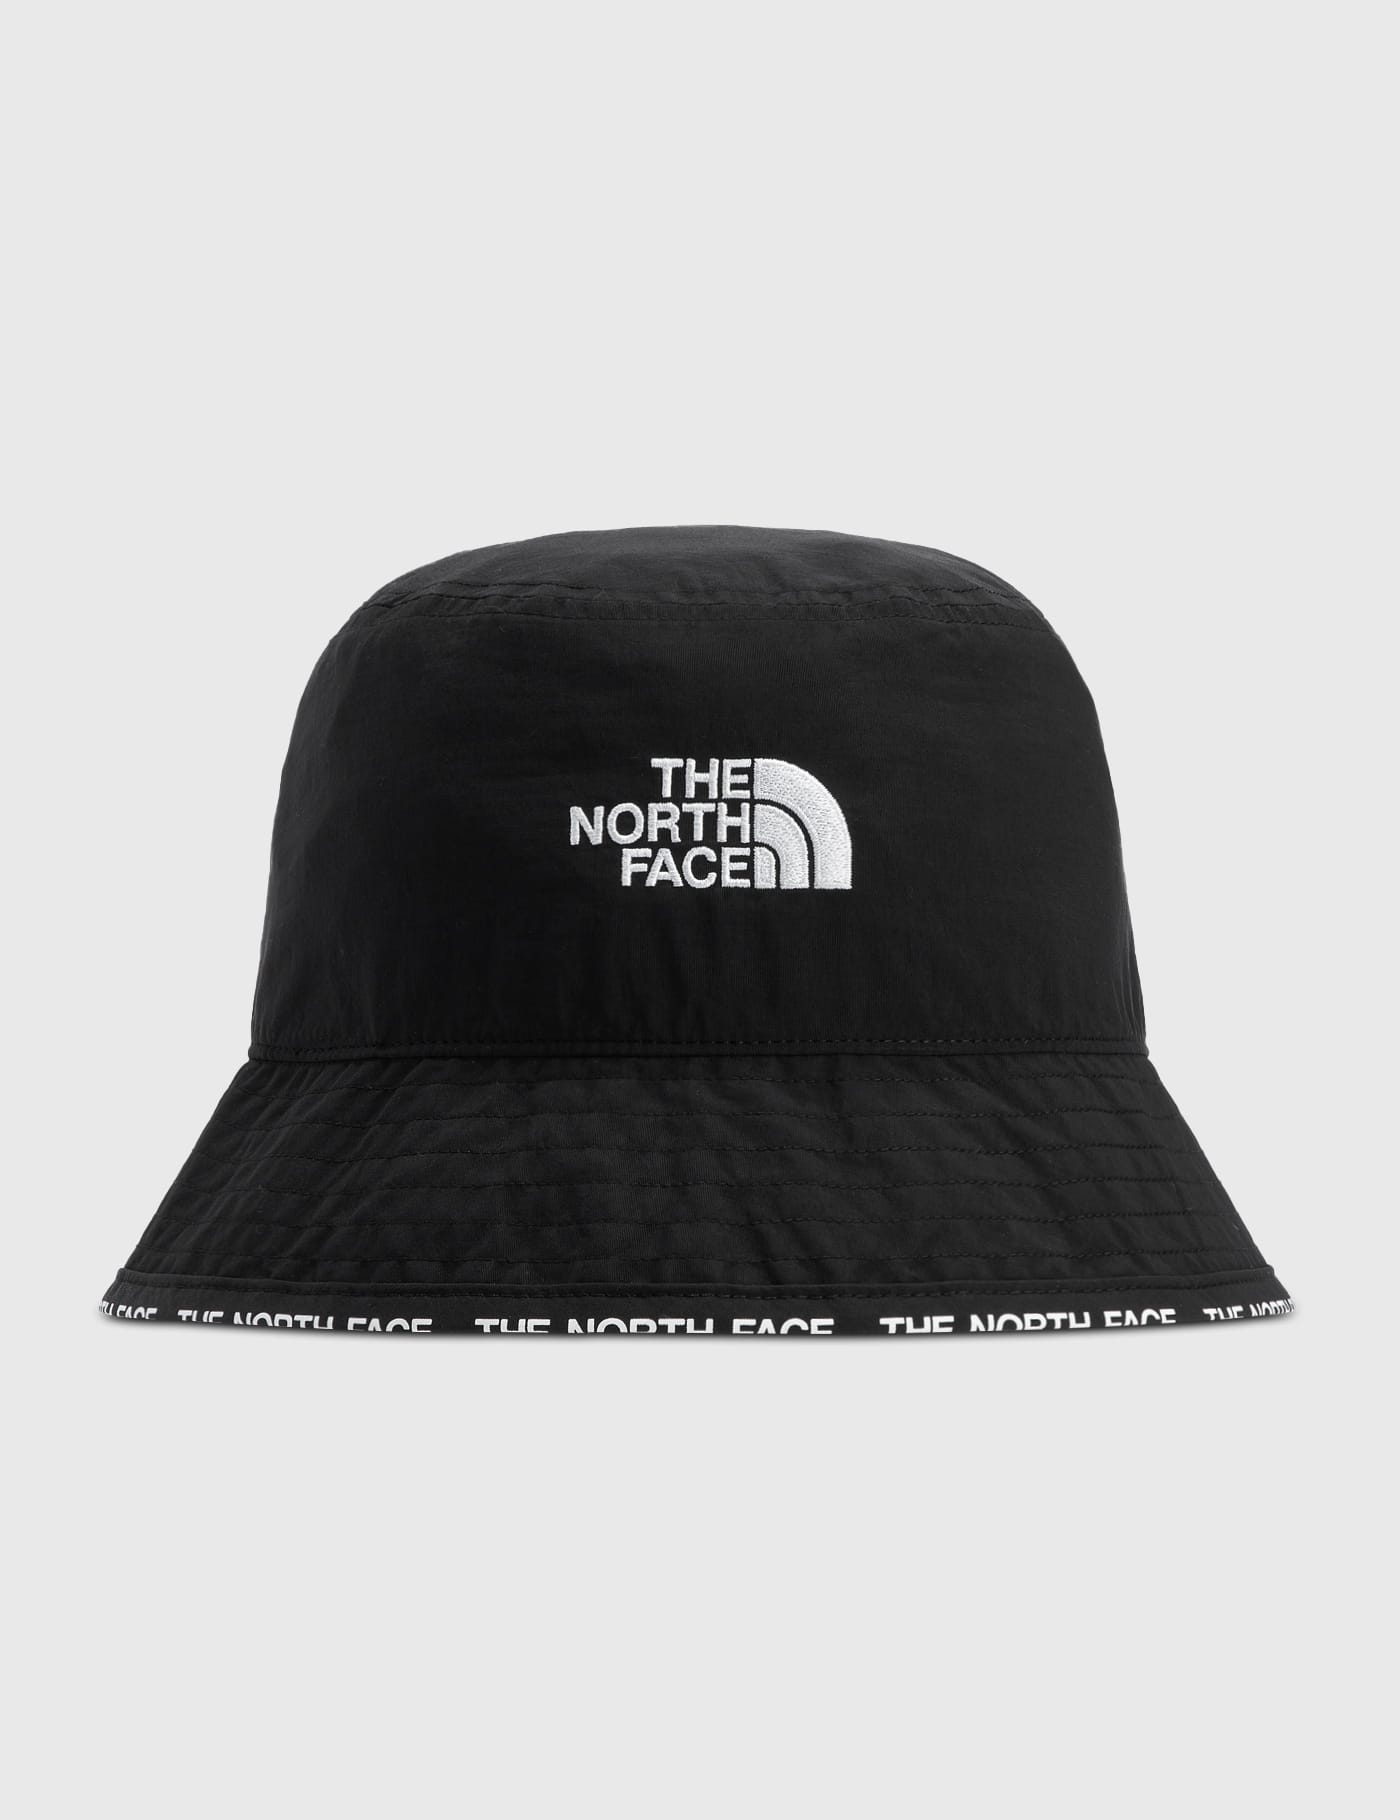 The North Face - Cypress Bucket Hat | HBX - Globally Curated 